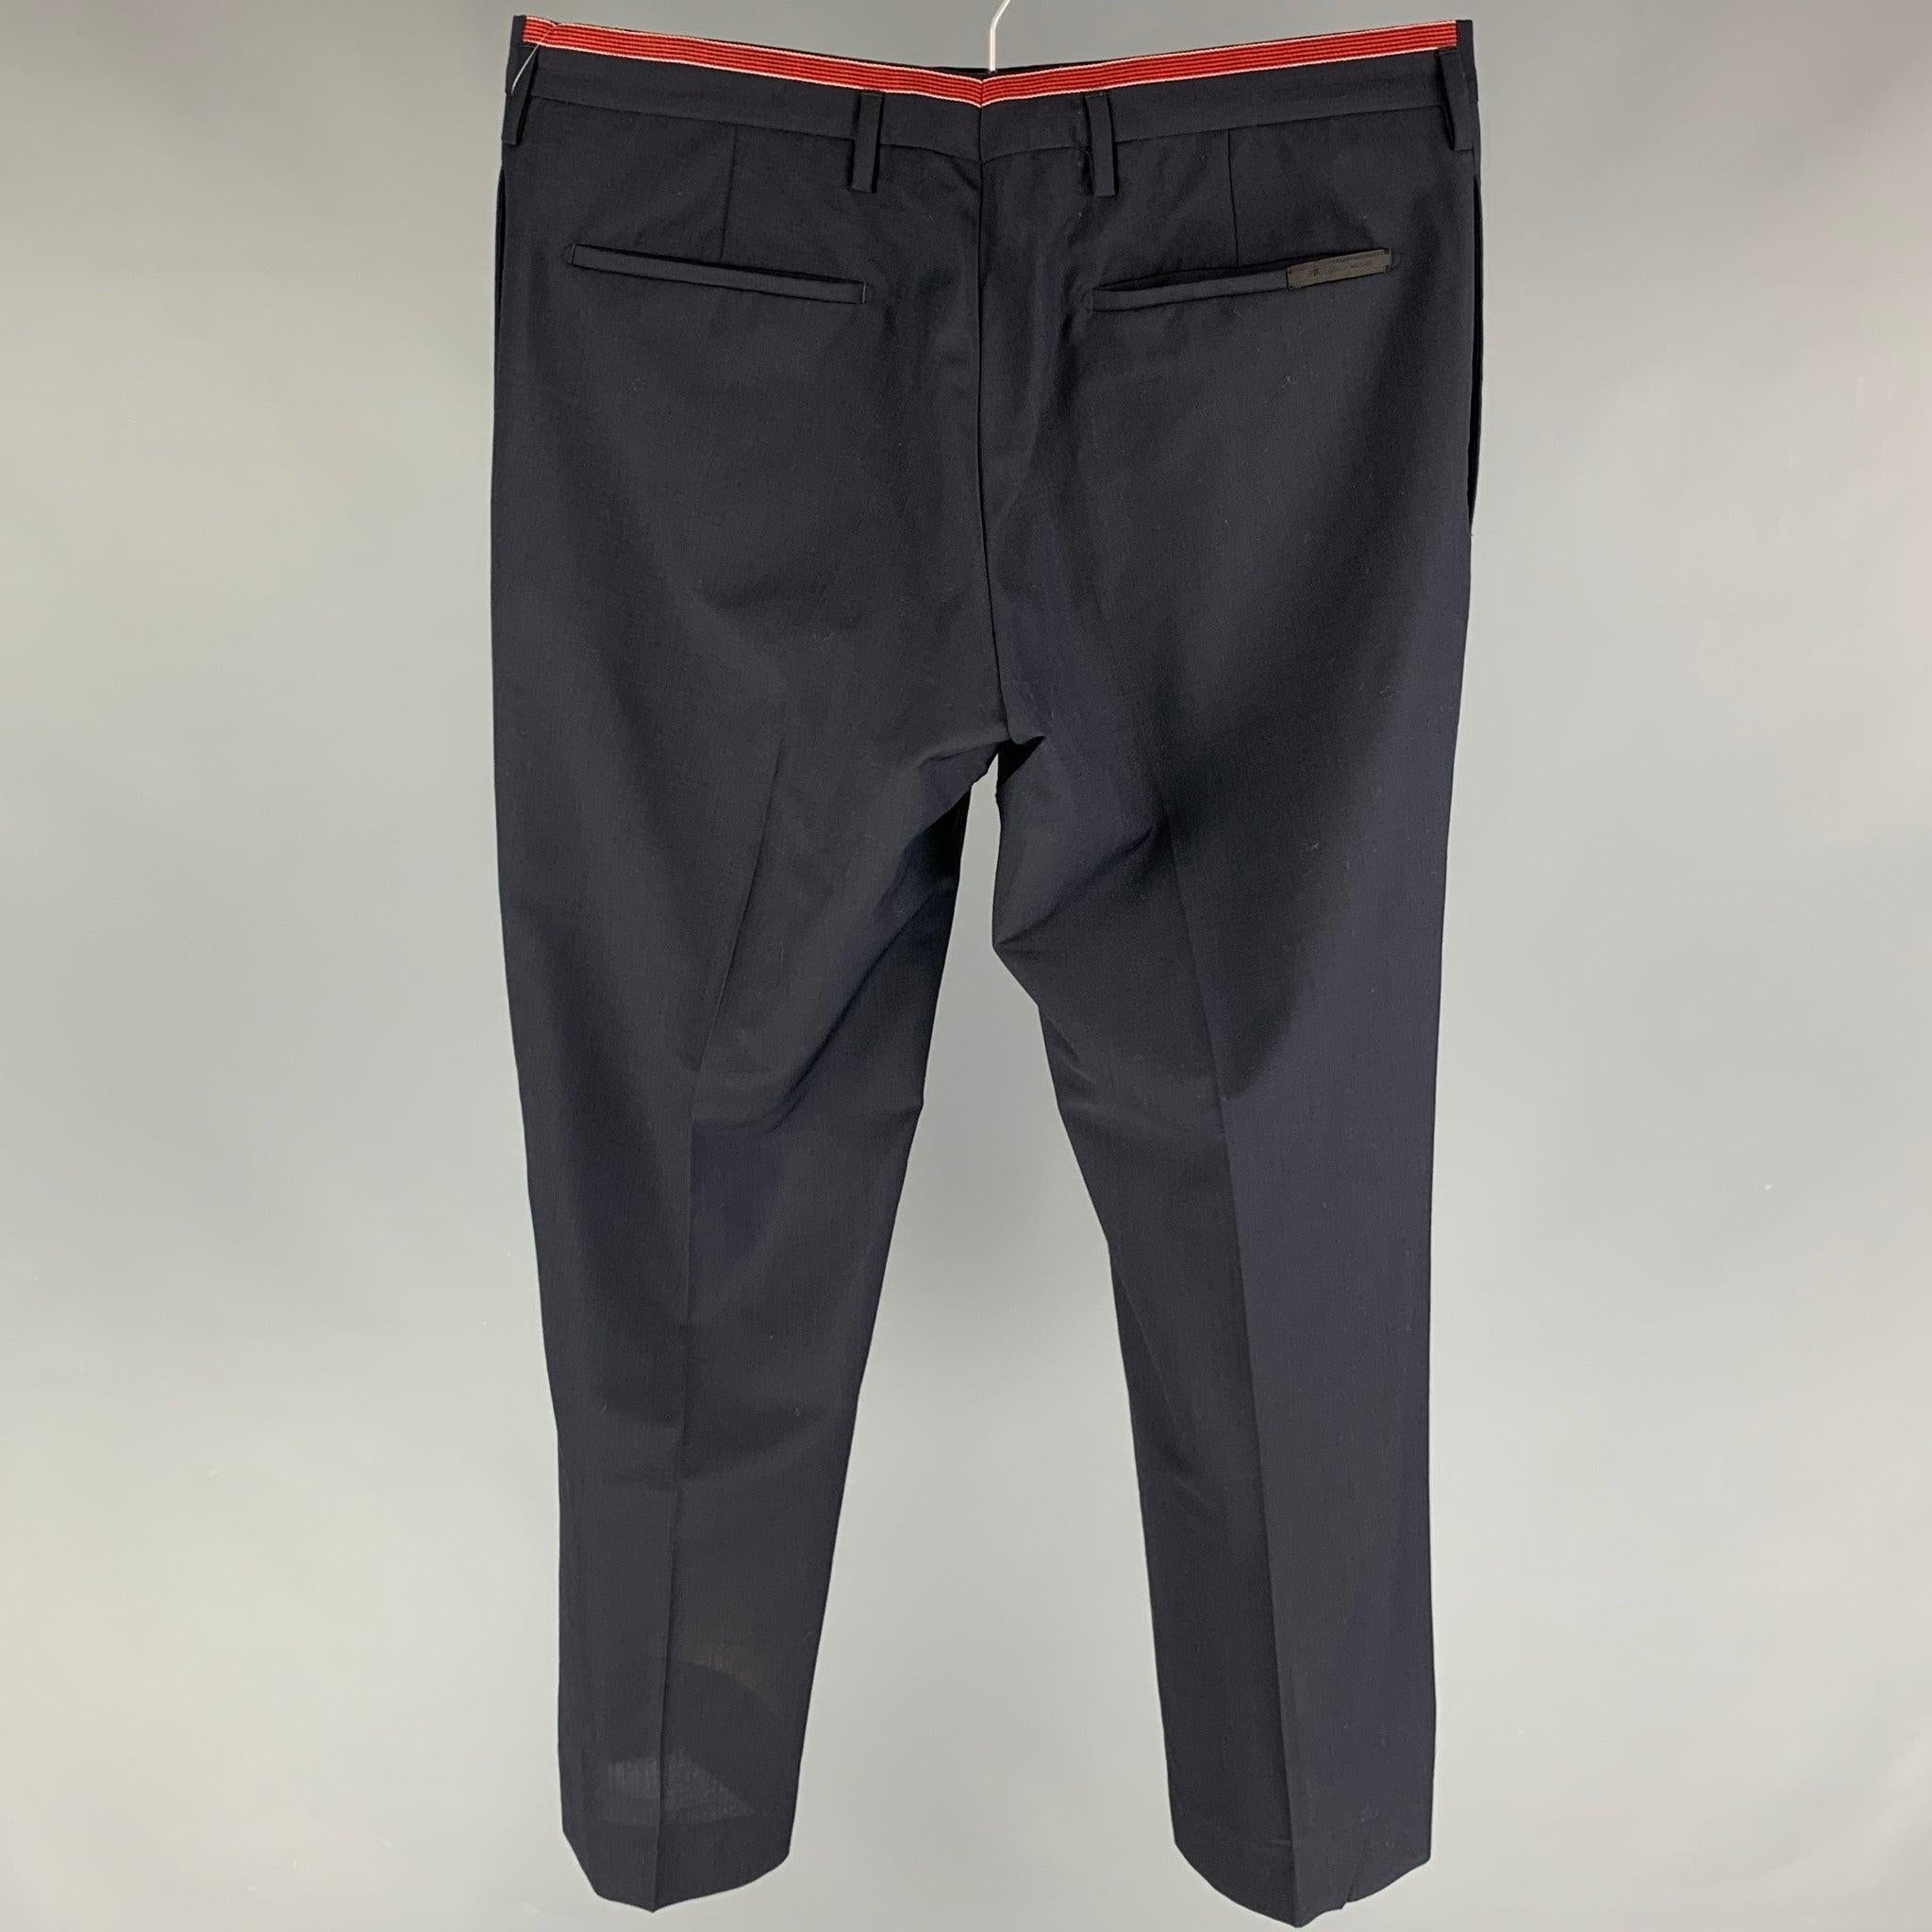 PRADA dress pants comes in a navy virgin wool featuring a flat front, red stripe trim, front tab, and a button fly closure. Made in Italy.
Very Good
Pre-Owned Condition. 

Marked:   50 

Measurements: 
  Waist: 34 inches  Rise: 10 inches  Inseam: 28